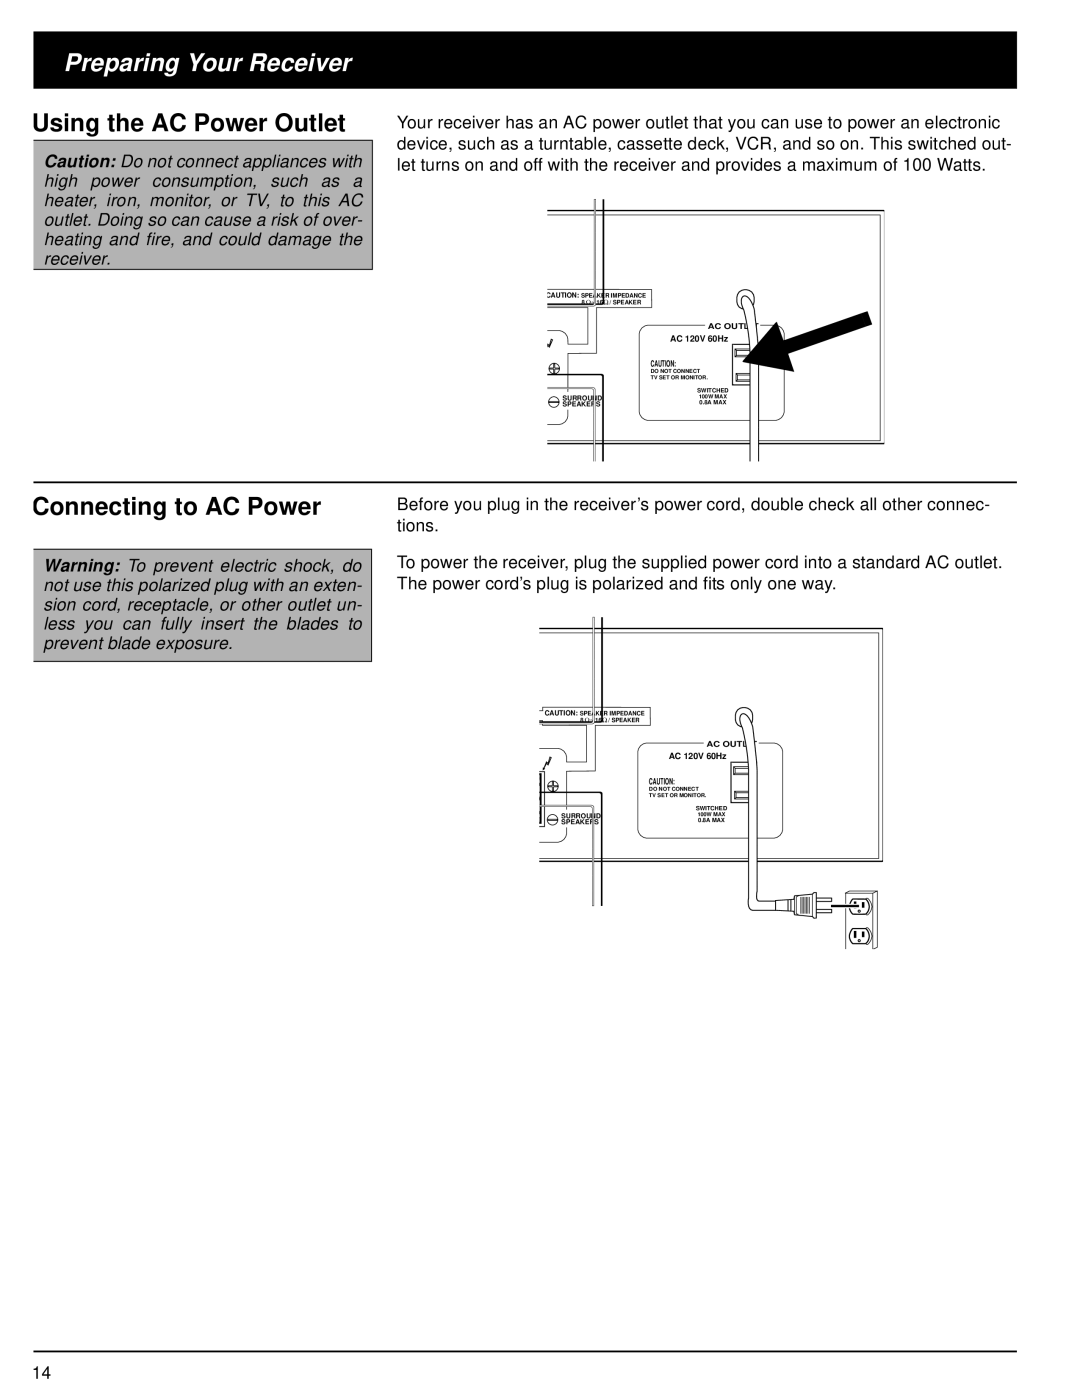 Optimus 31-3042 owner manual Preparing Your Receiver, Using the AC Power Outlet, Connecting to AC Power 